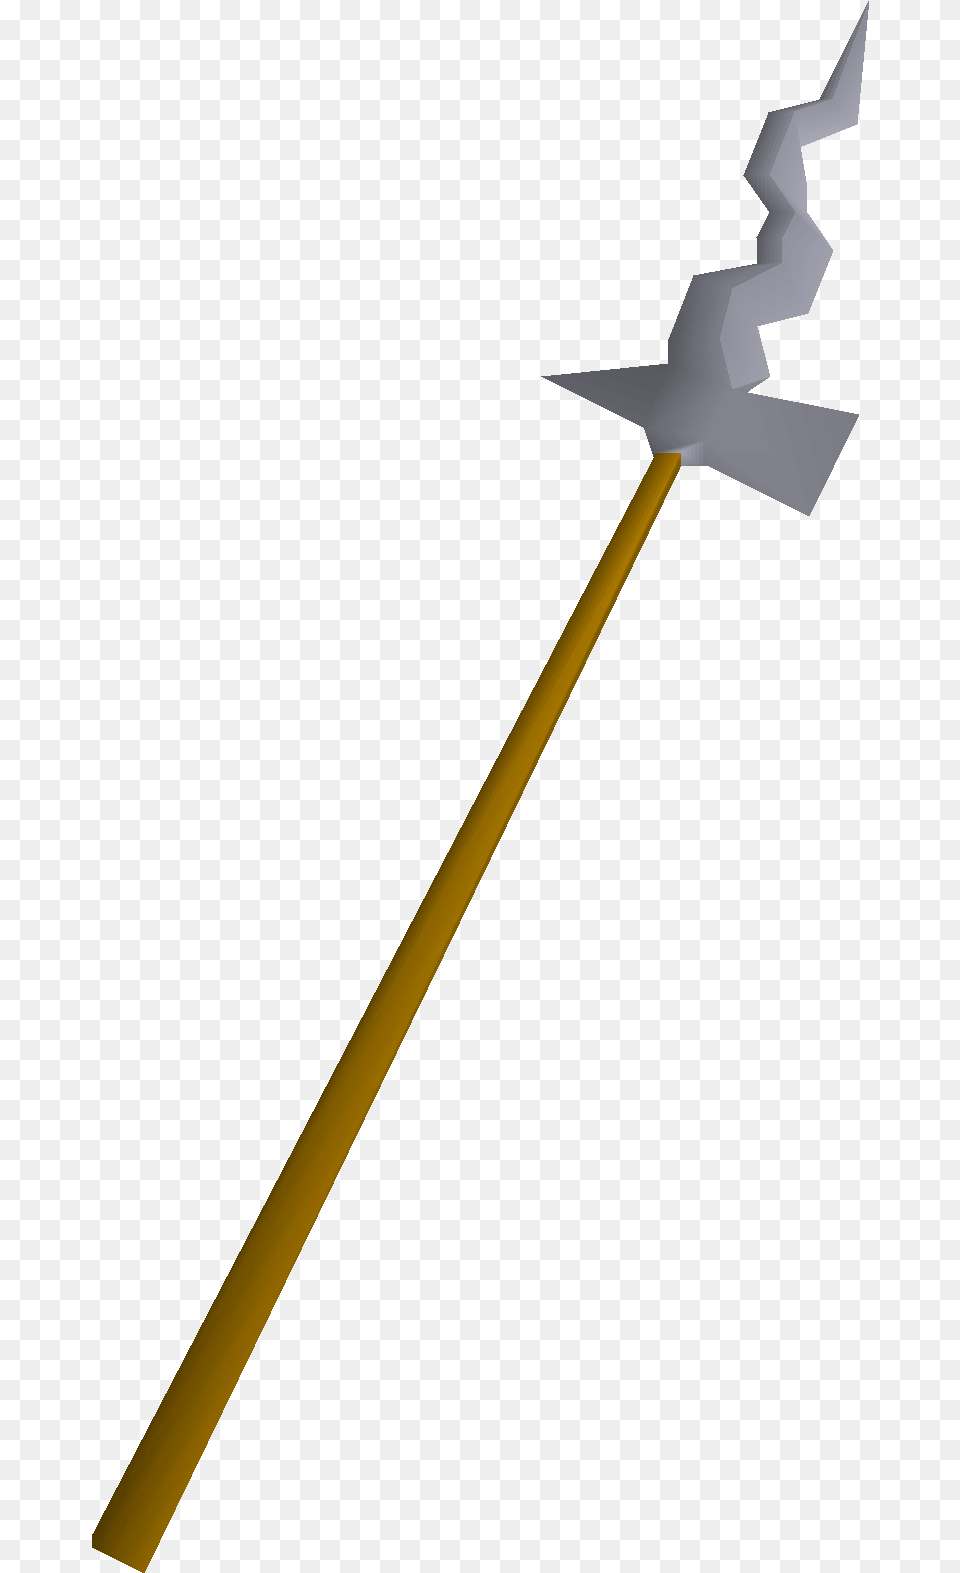 Guthix Mjolnir Airplane, Weapon, Spear Png